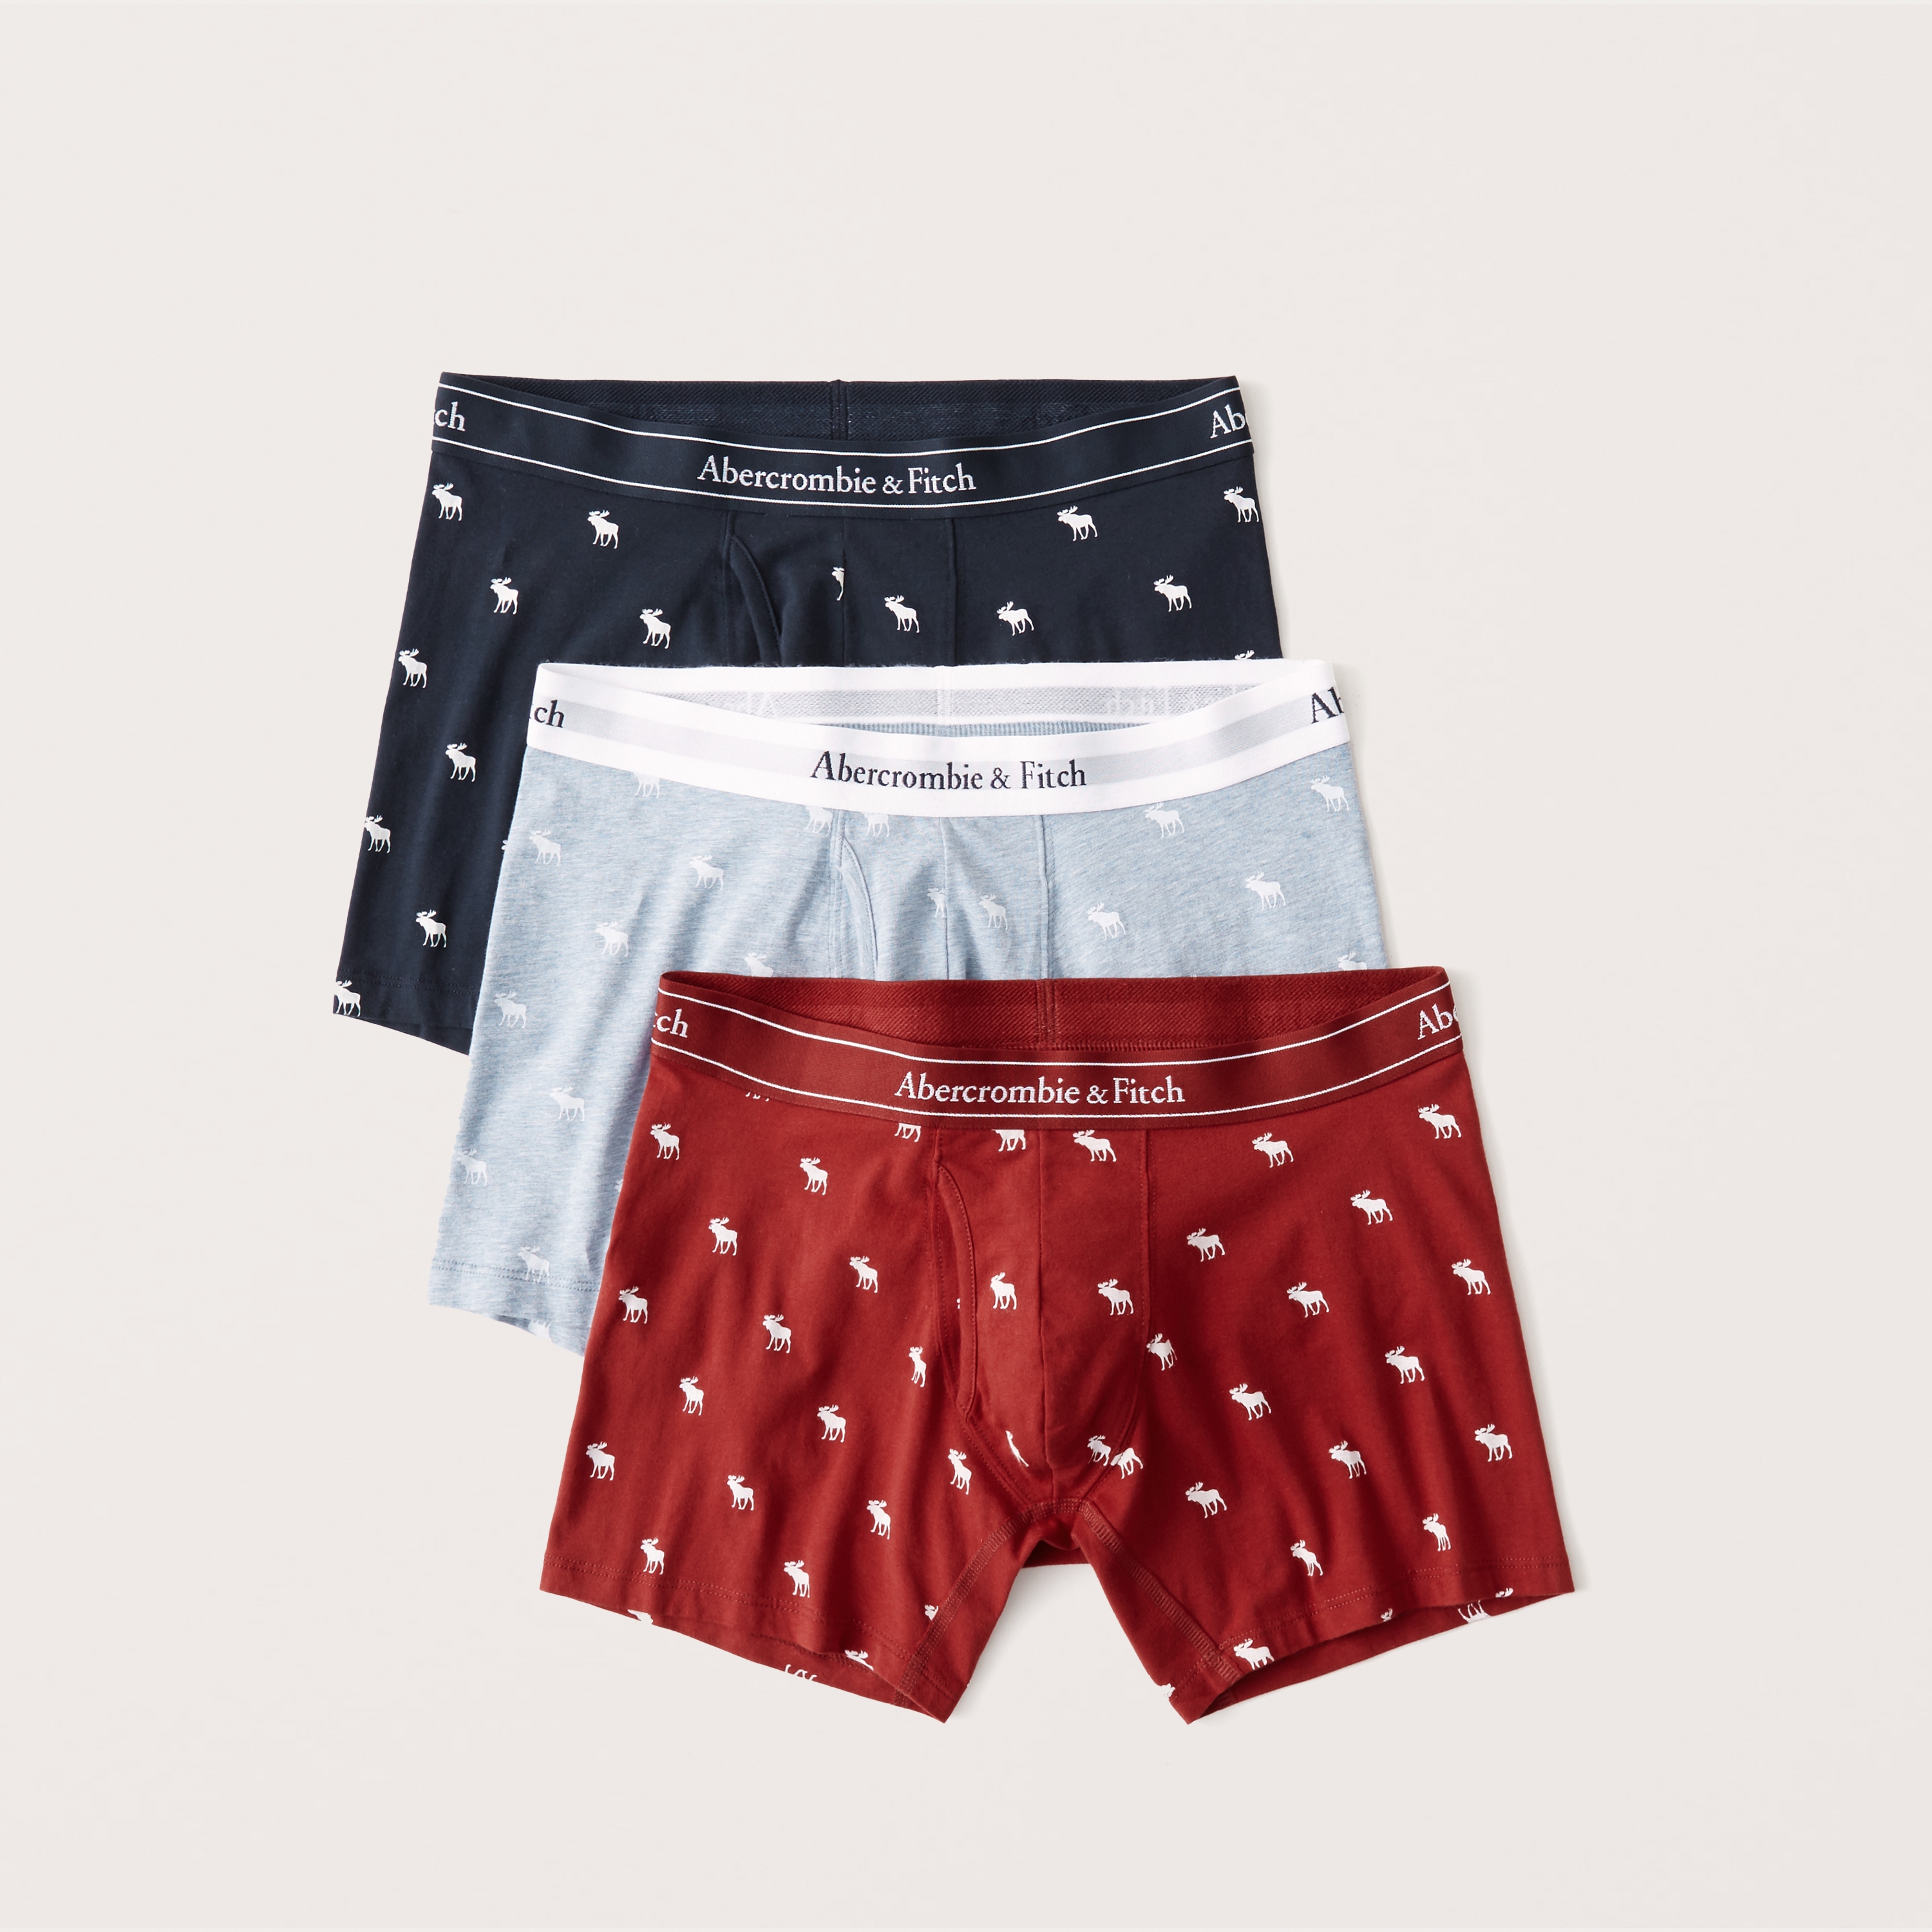 abercrombie and fitch boxer shorts